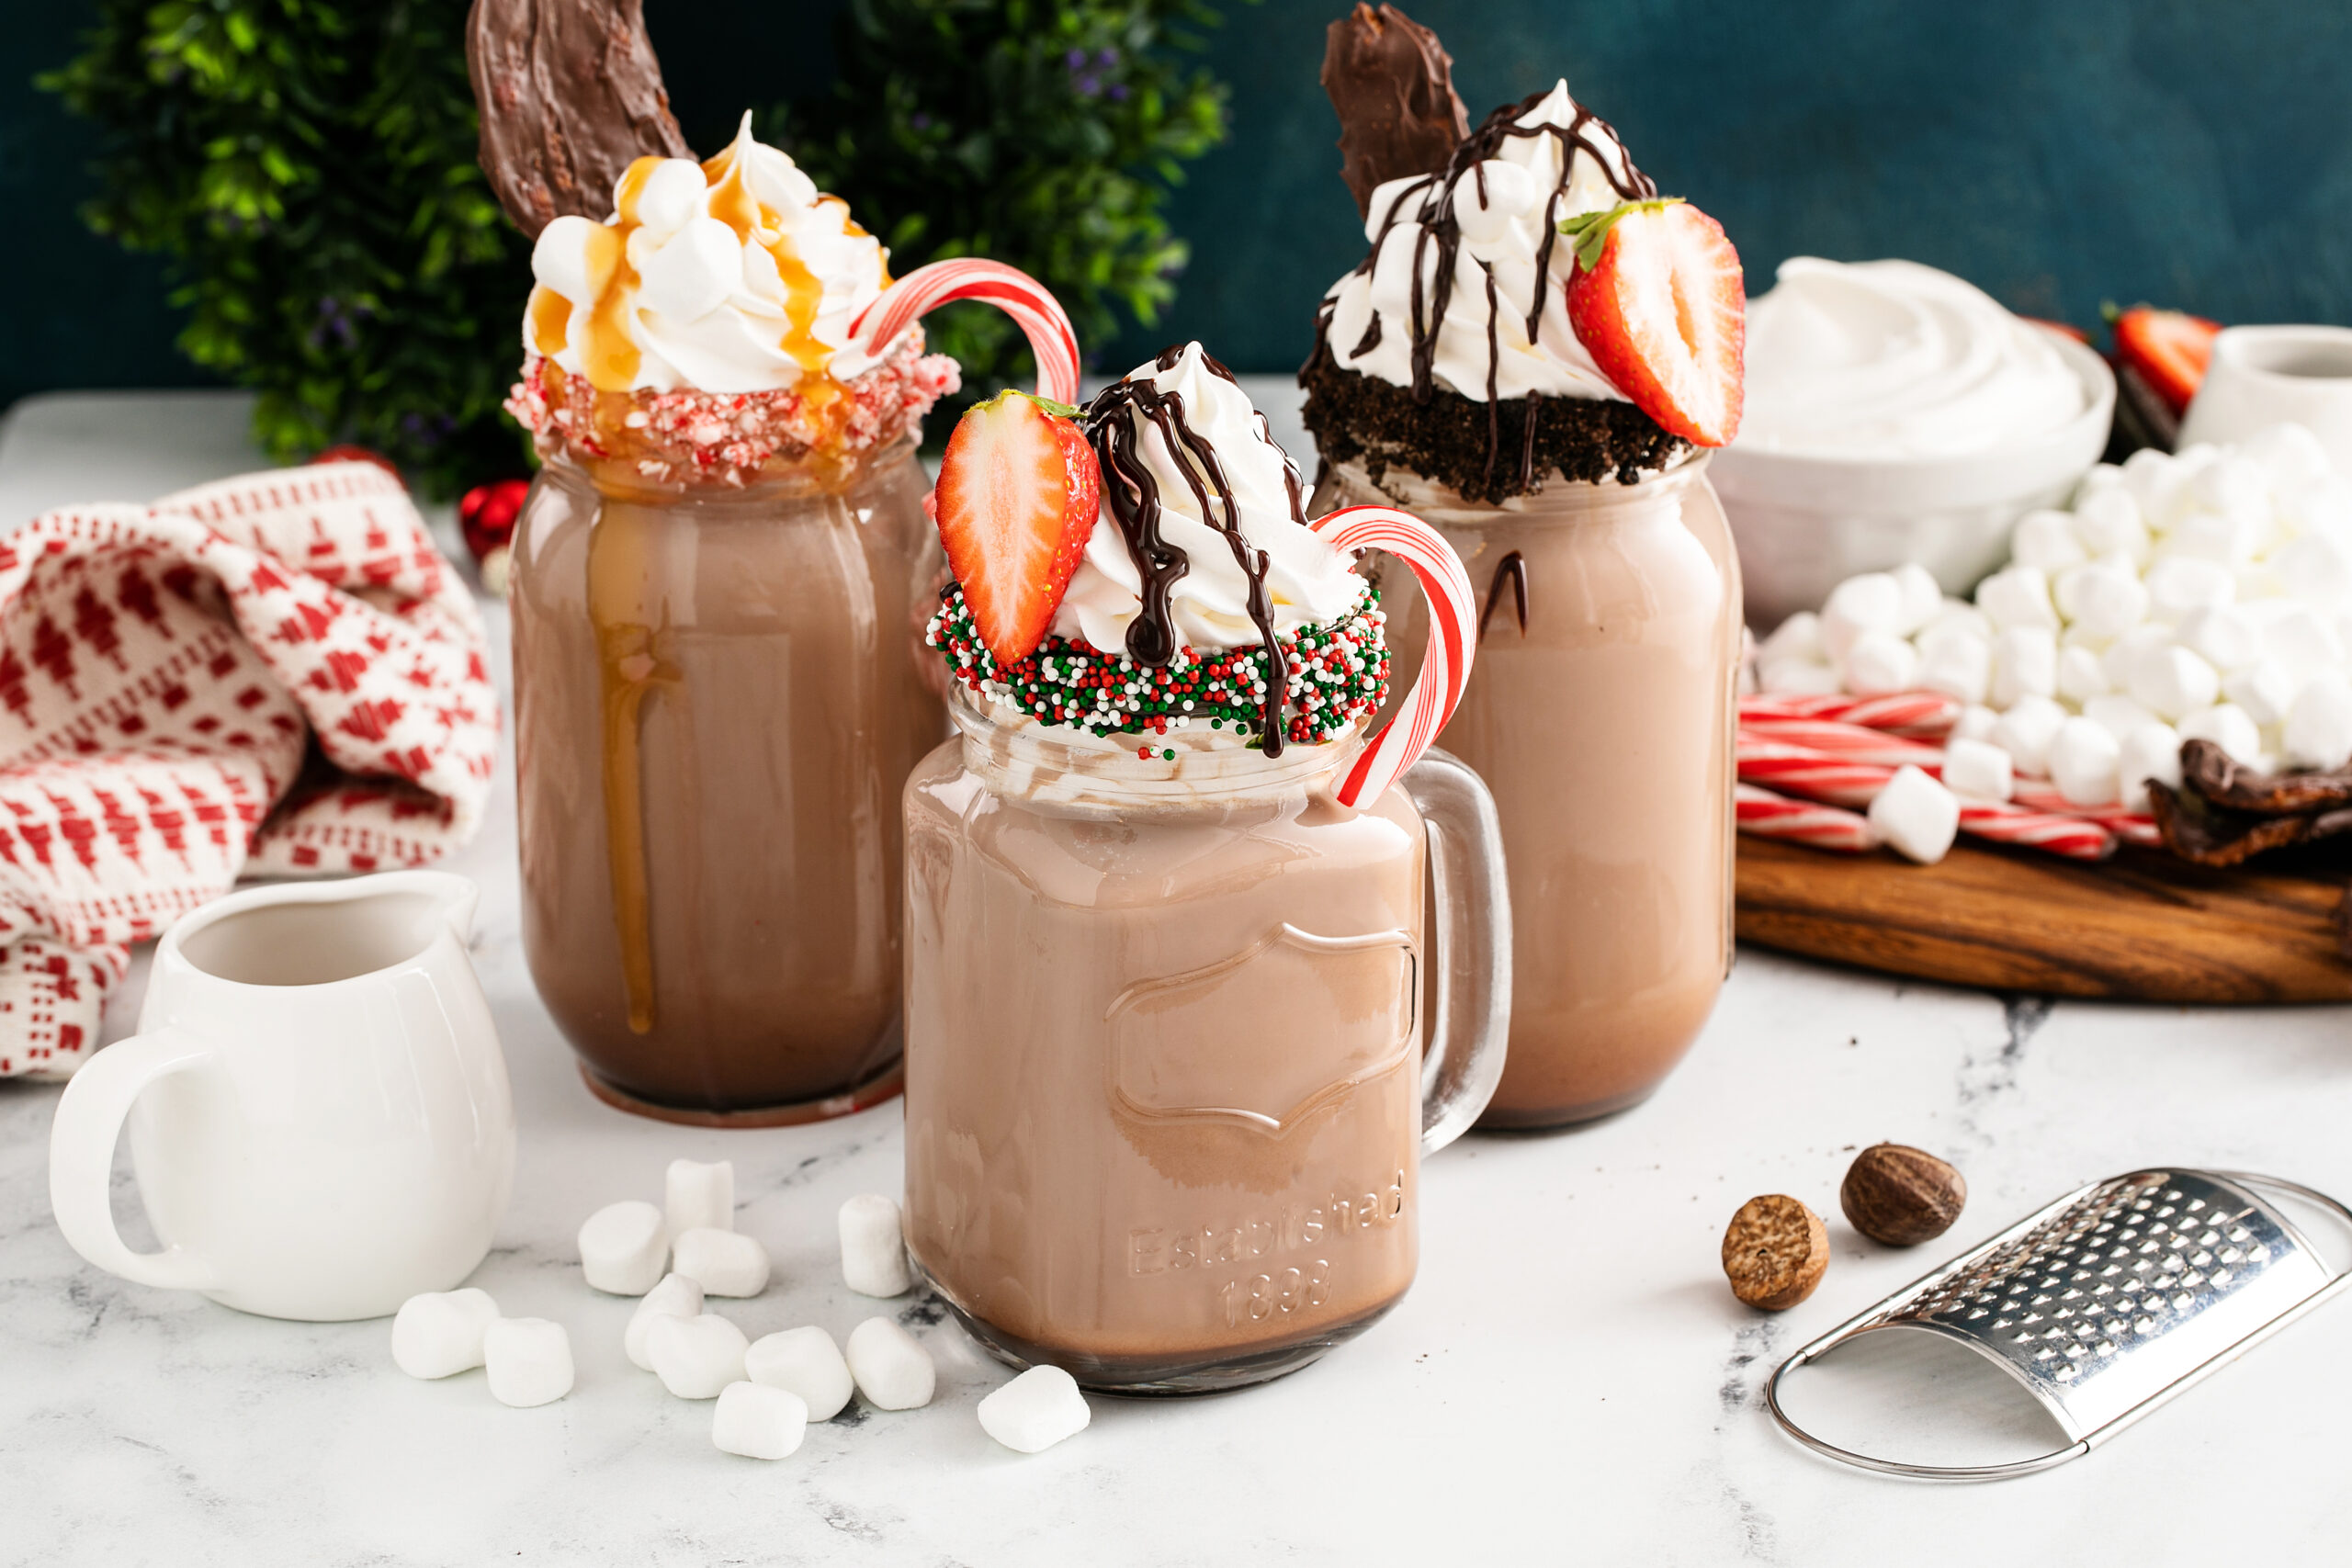 Epic Hot Cocoa Bar Ideas to Make for the Holidays